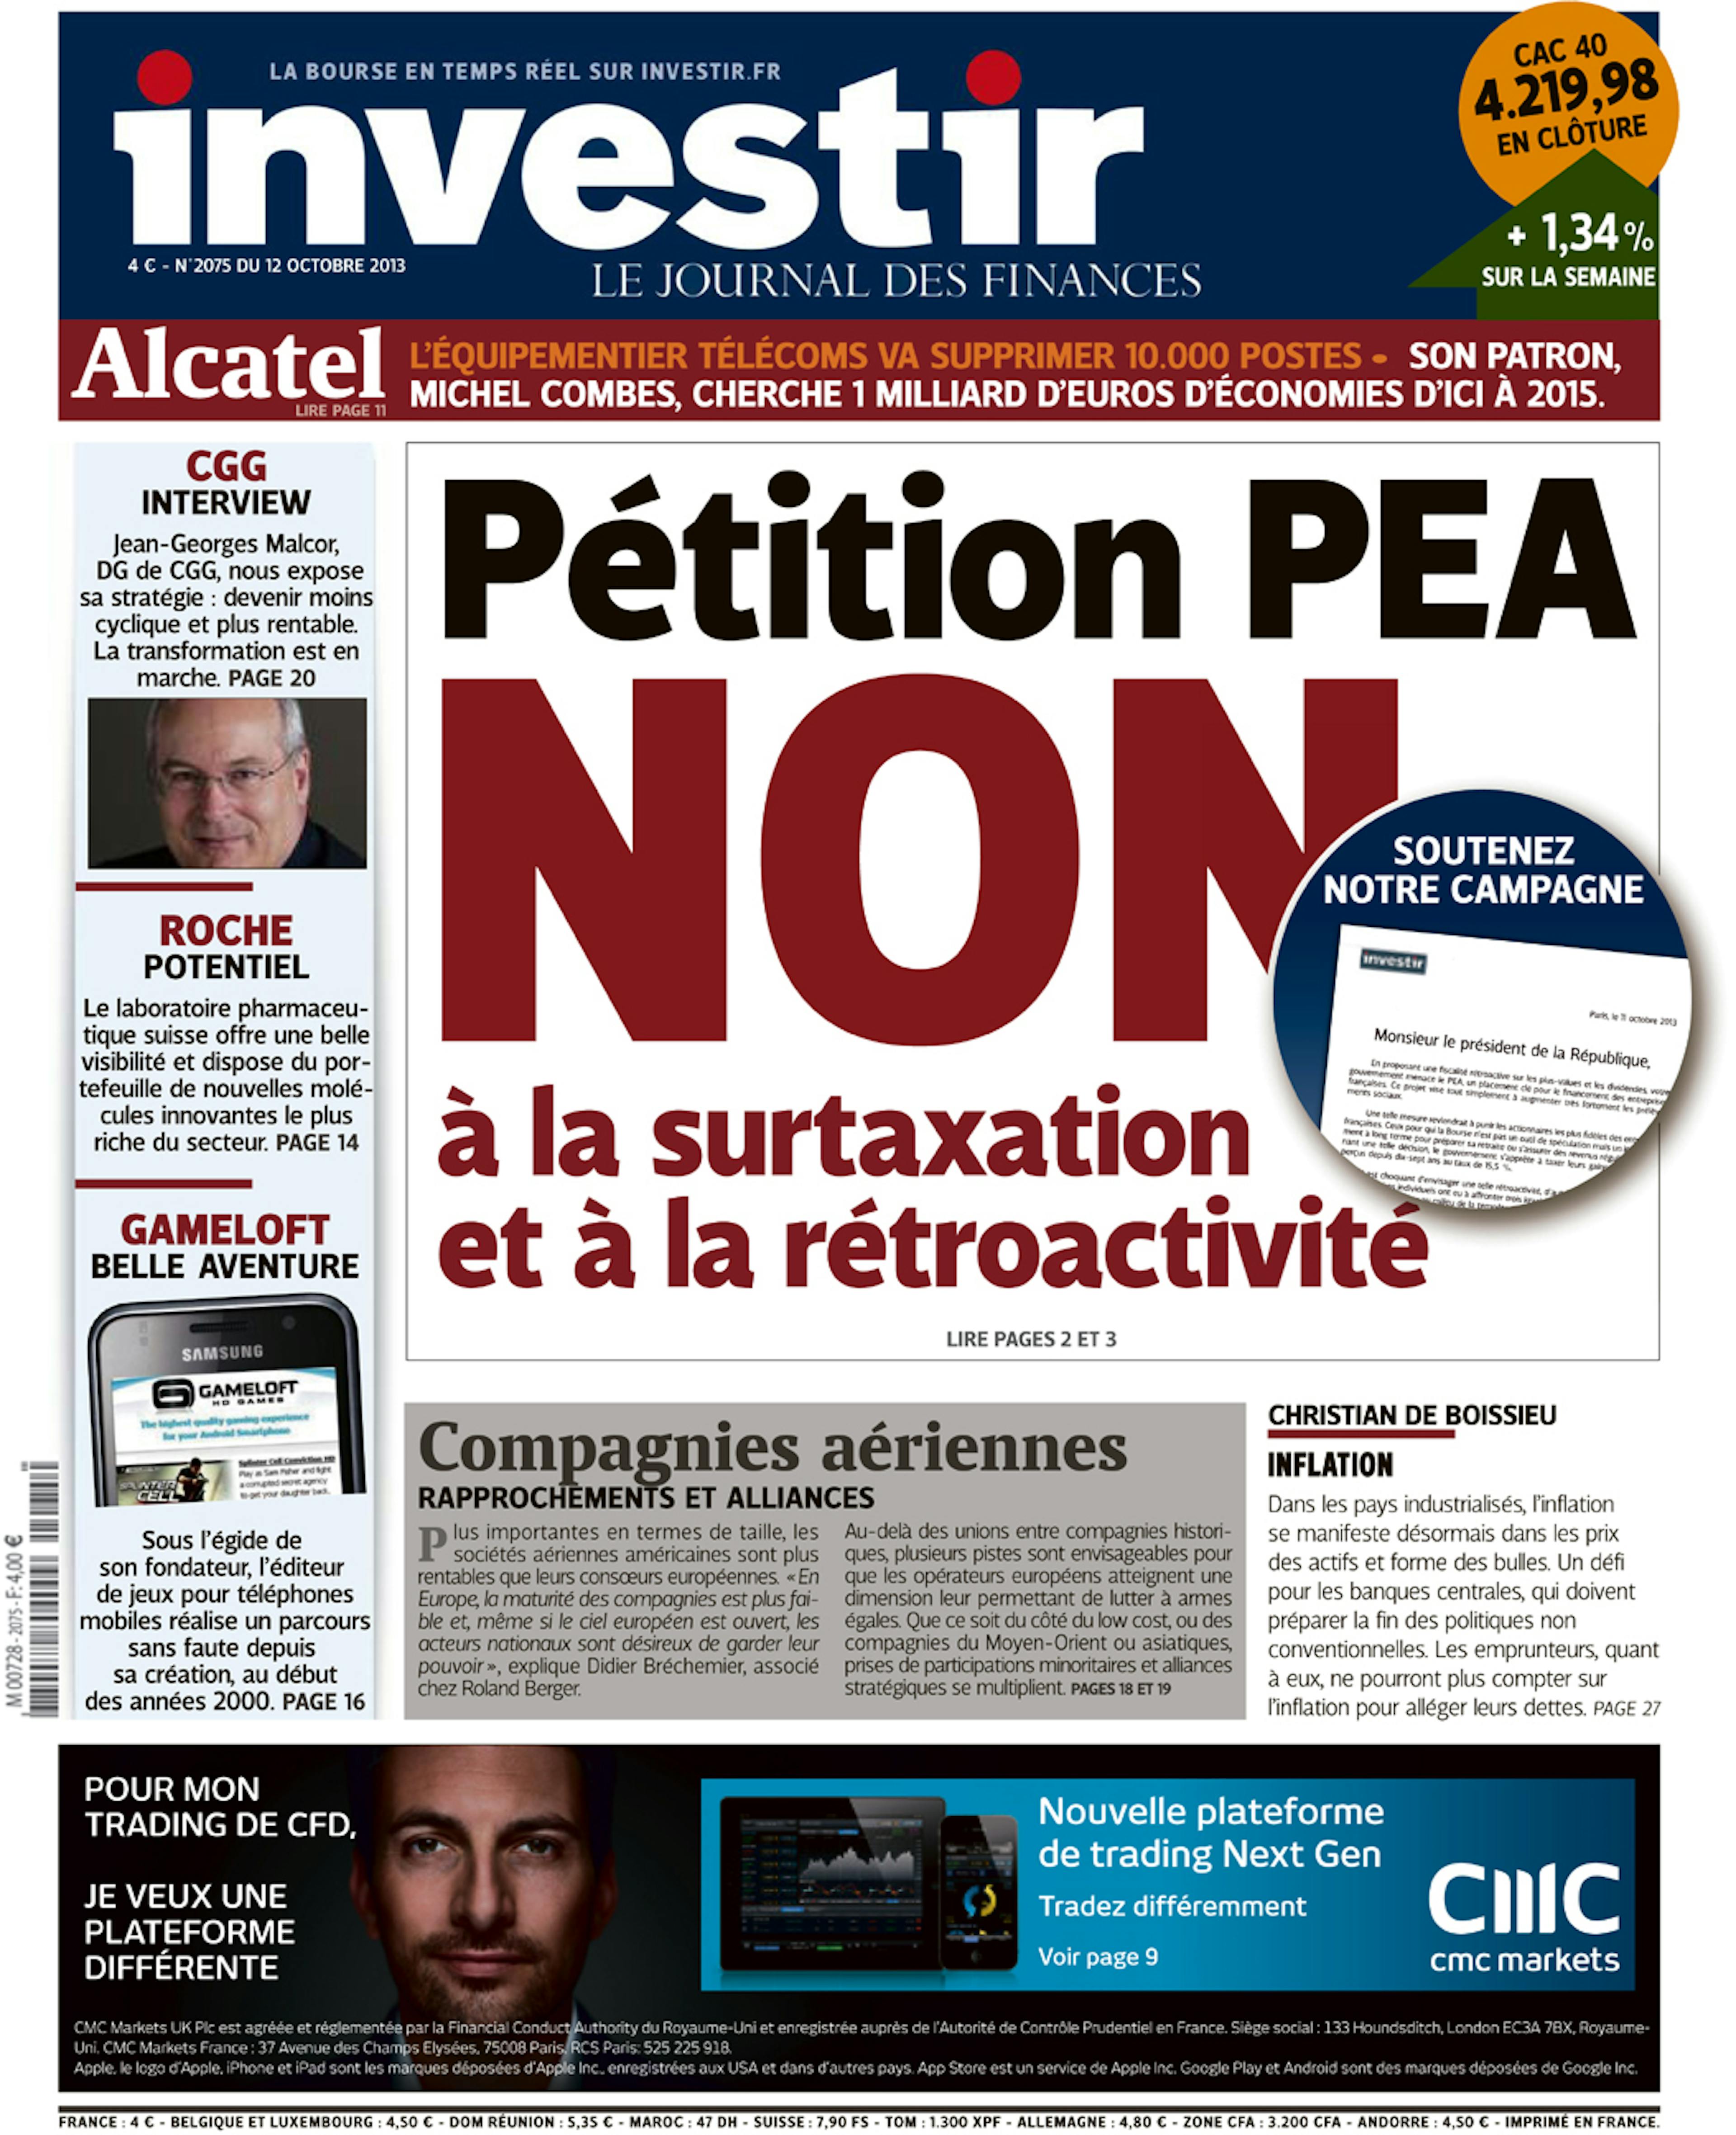 "Pétition PEA" special edition from October 12, 2013.